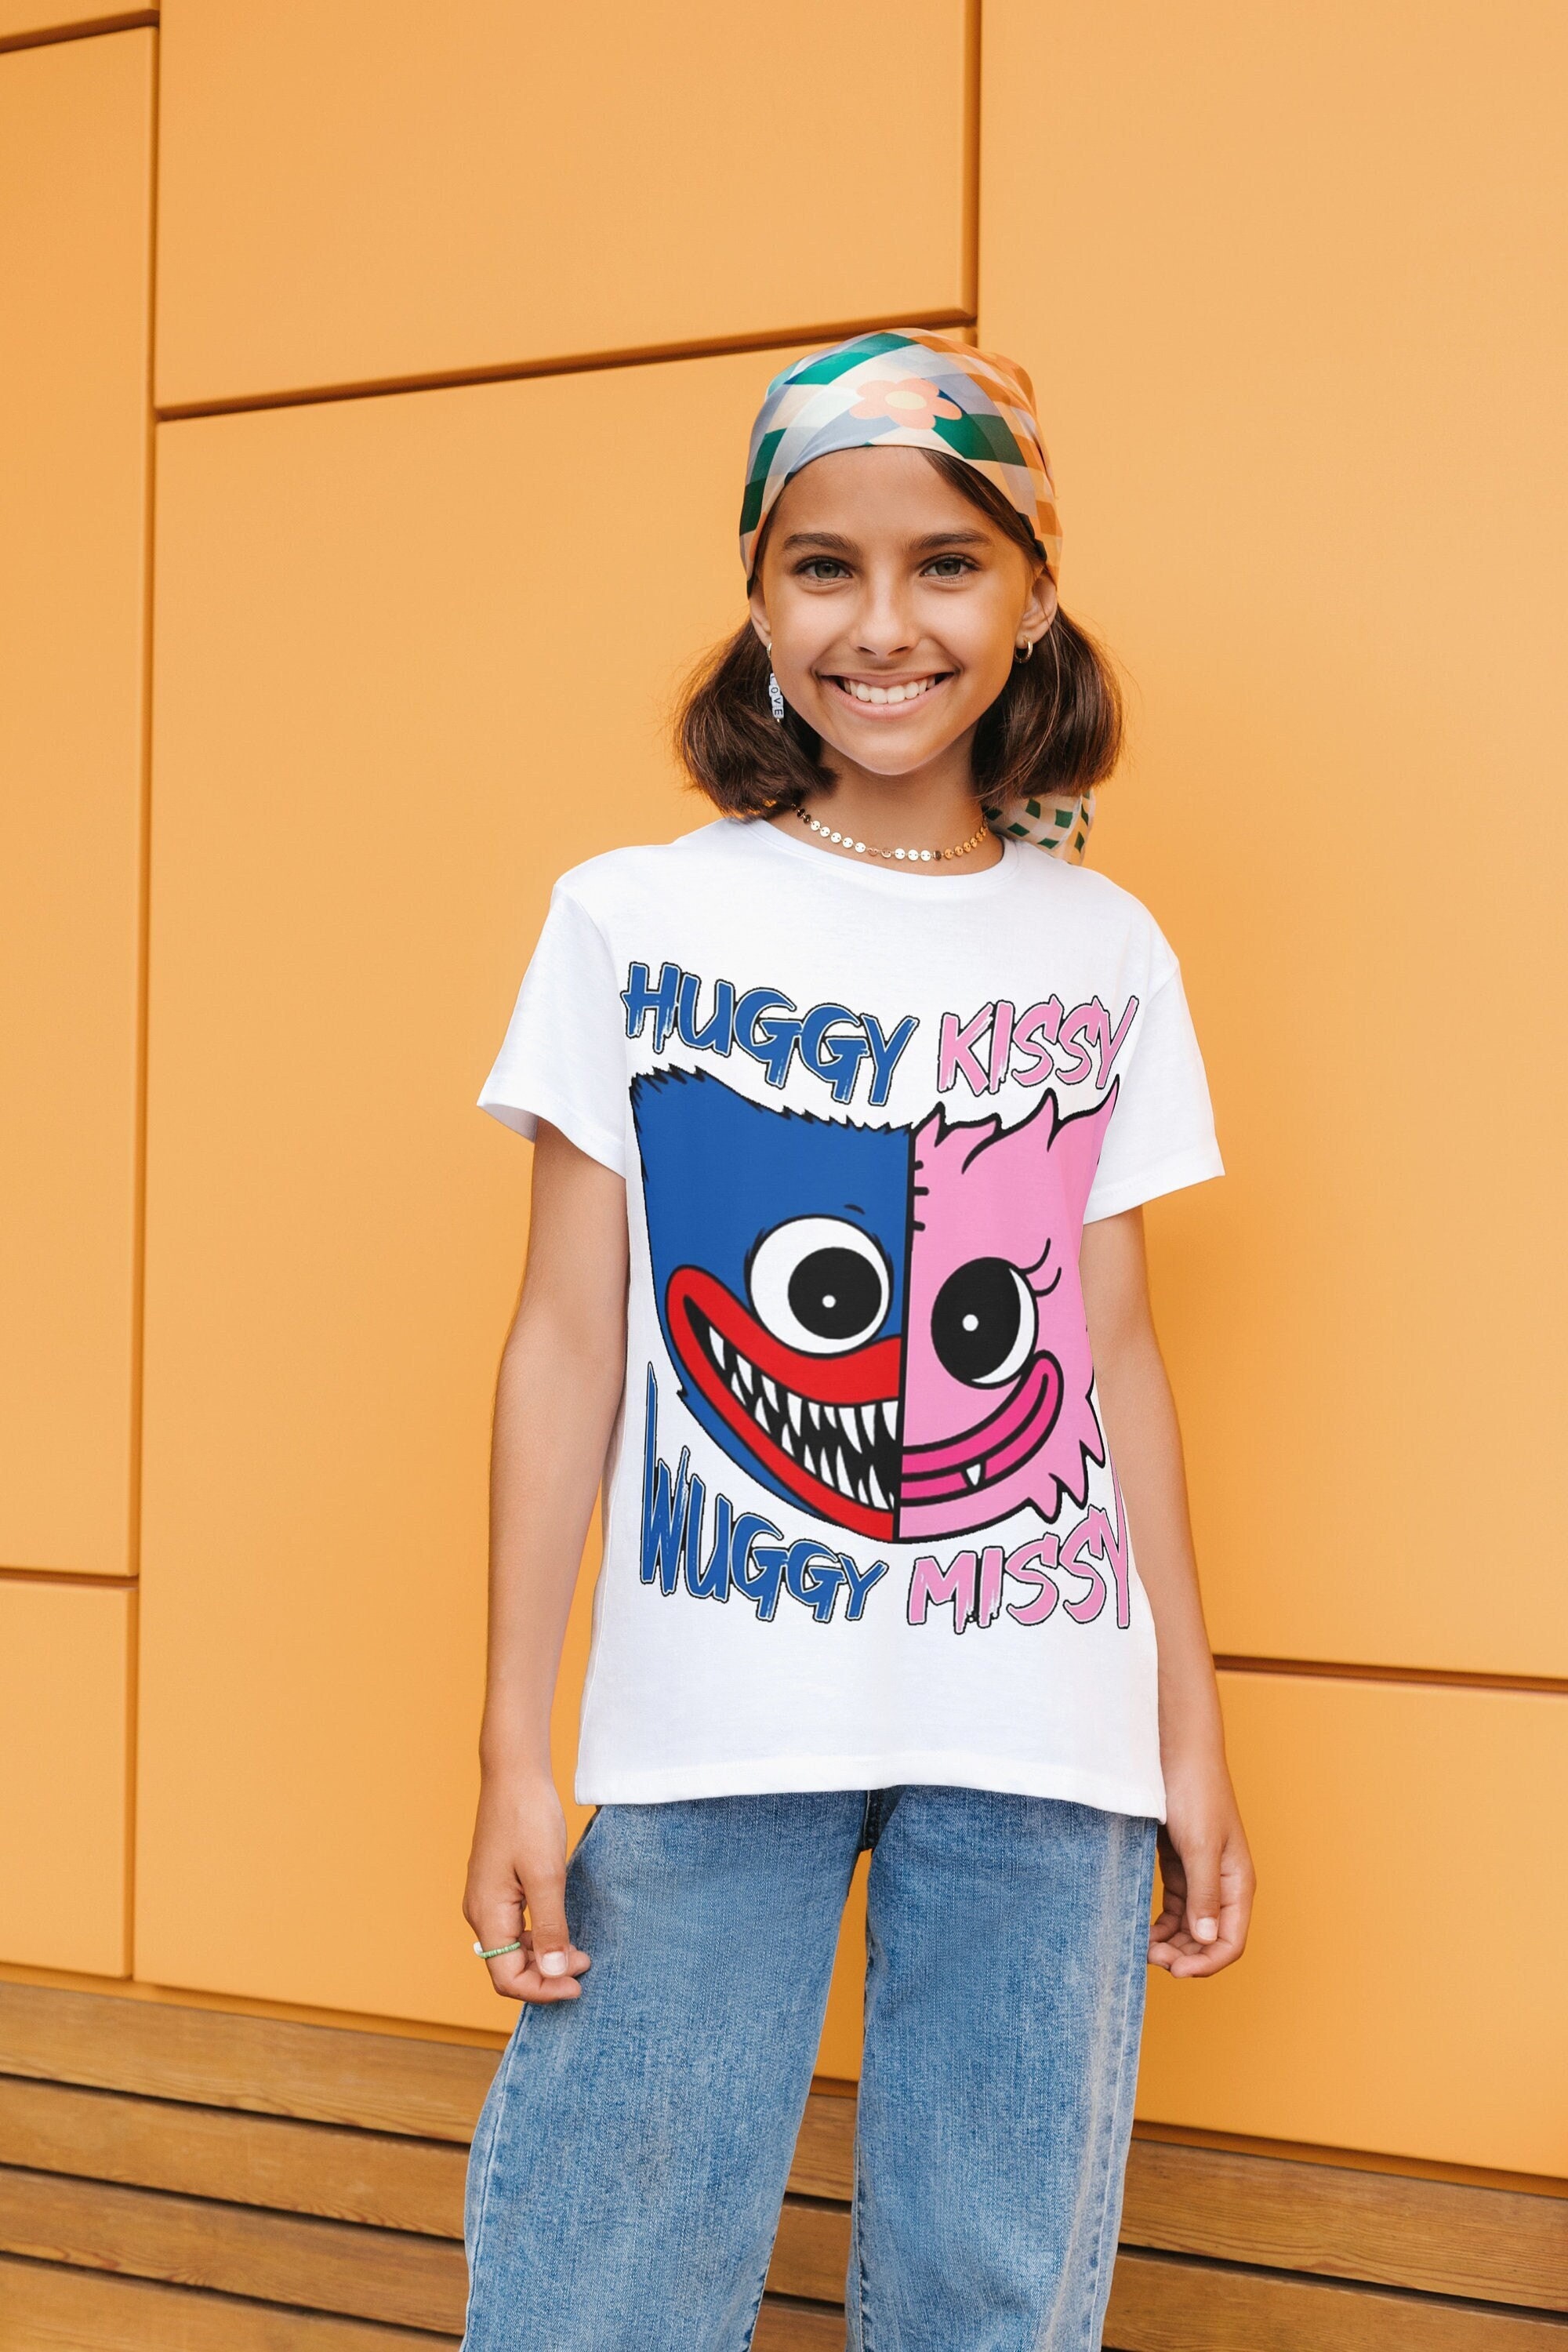 Mad Engine Poppy Playtime Boys' CH2 Bad Guys Huggy Mommy Long Legs Boxy Boo Character Graphic T-Shirt